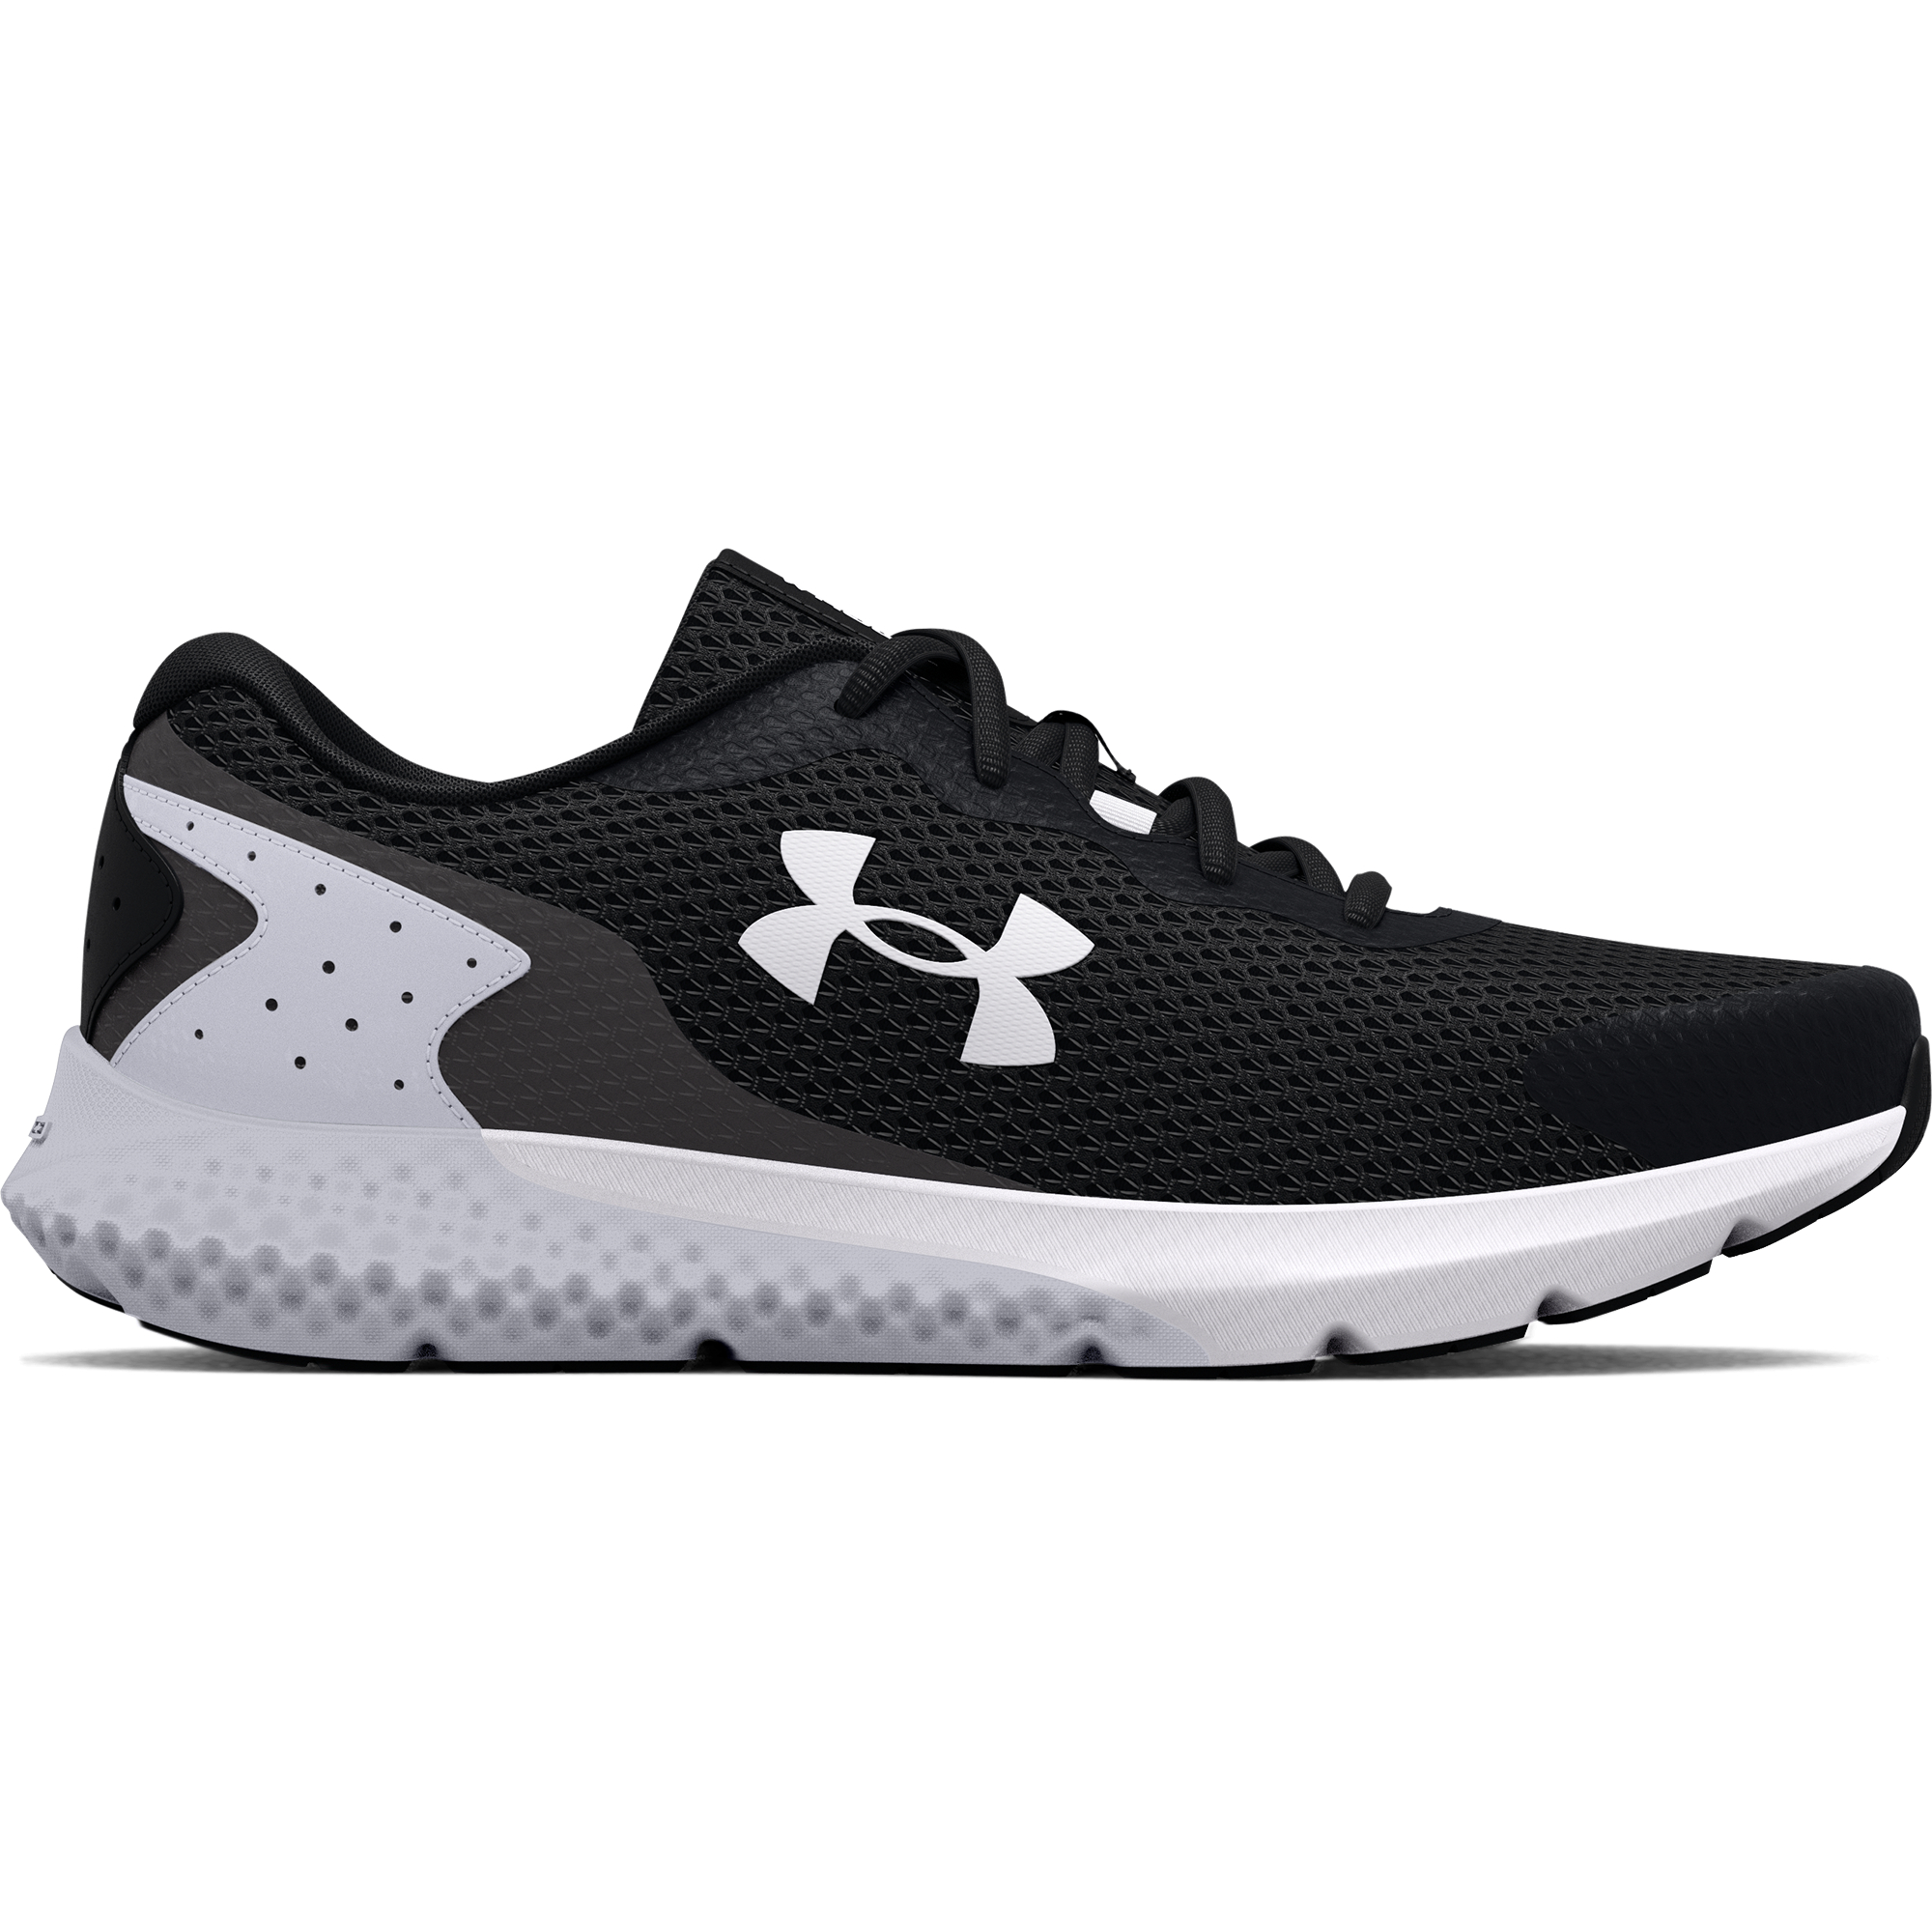 UNDER ARMOUR UA Charged Rogue 3 black/mod gray/white